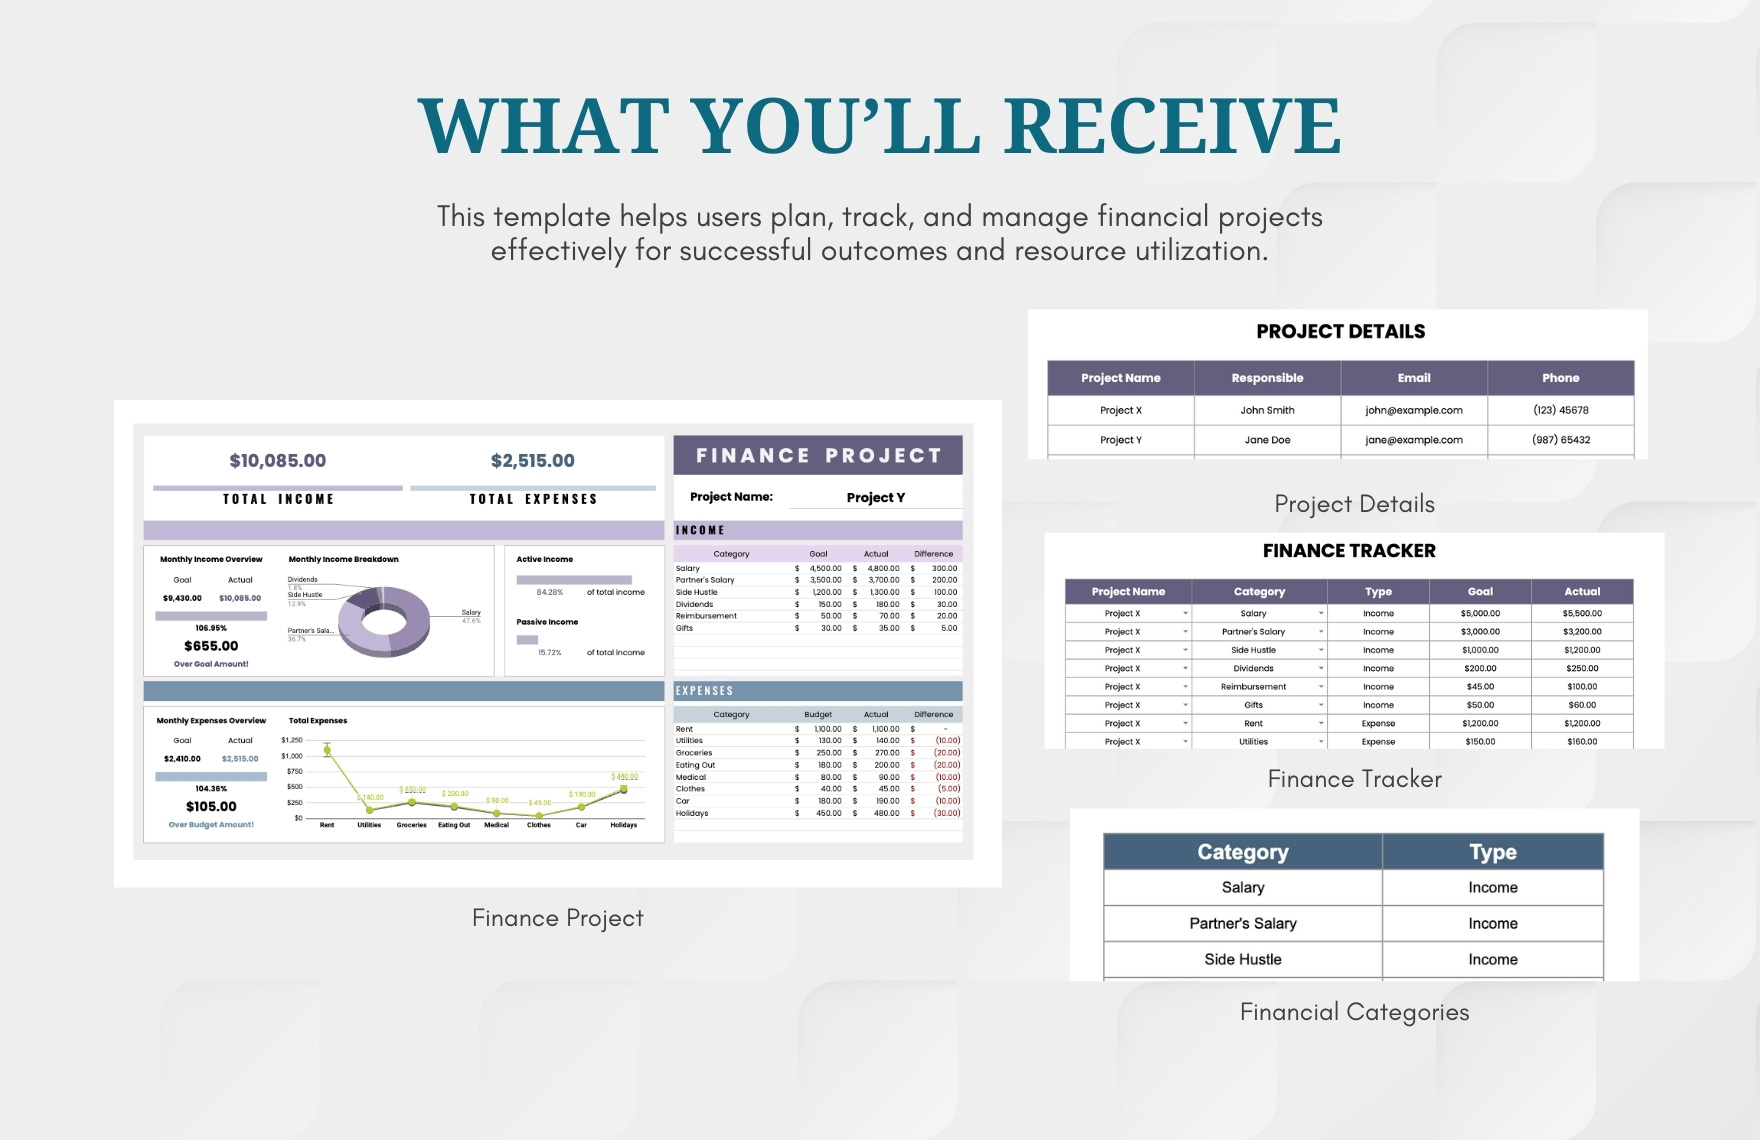 Finance Project Template